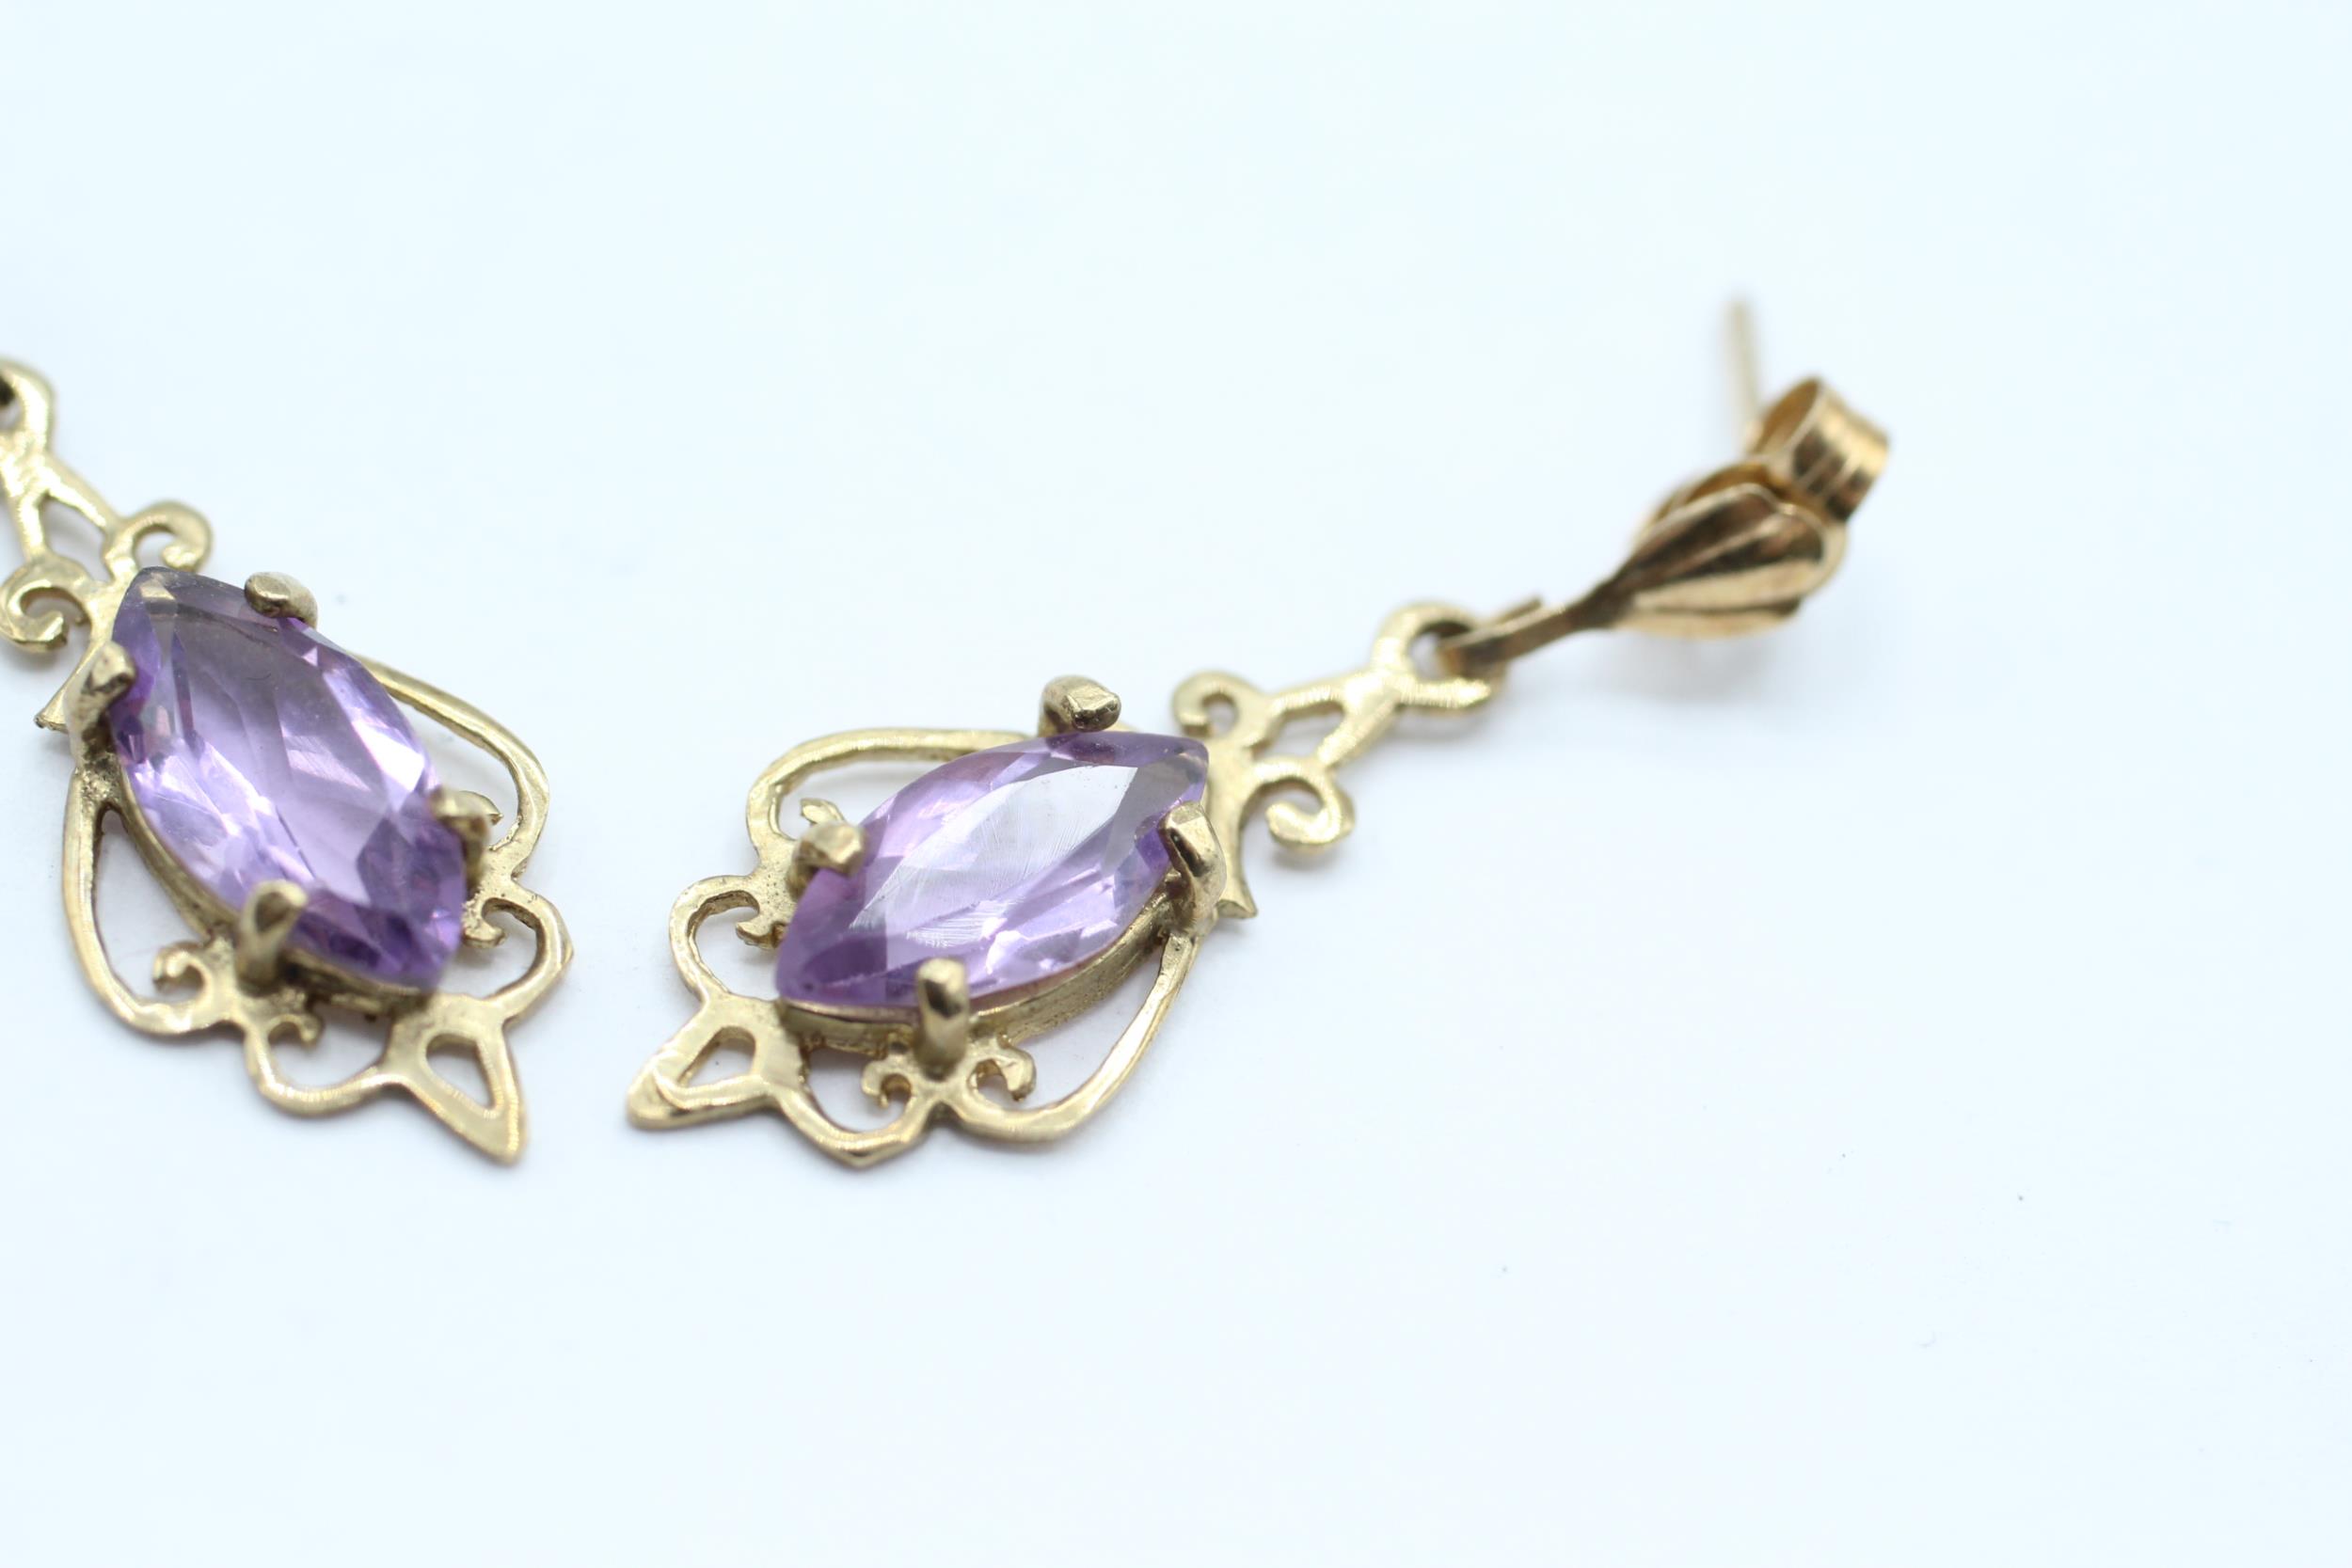 9ct gold marquise cut amethyst drop earrings with scroll backs 1.7 g - Image 3 of 4